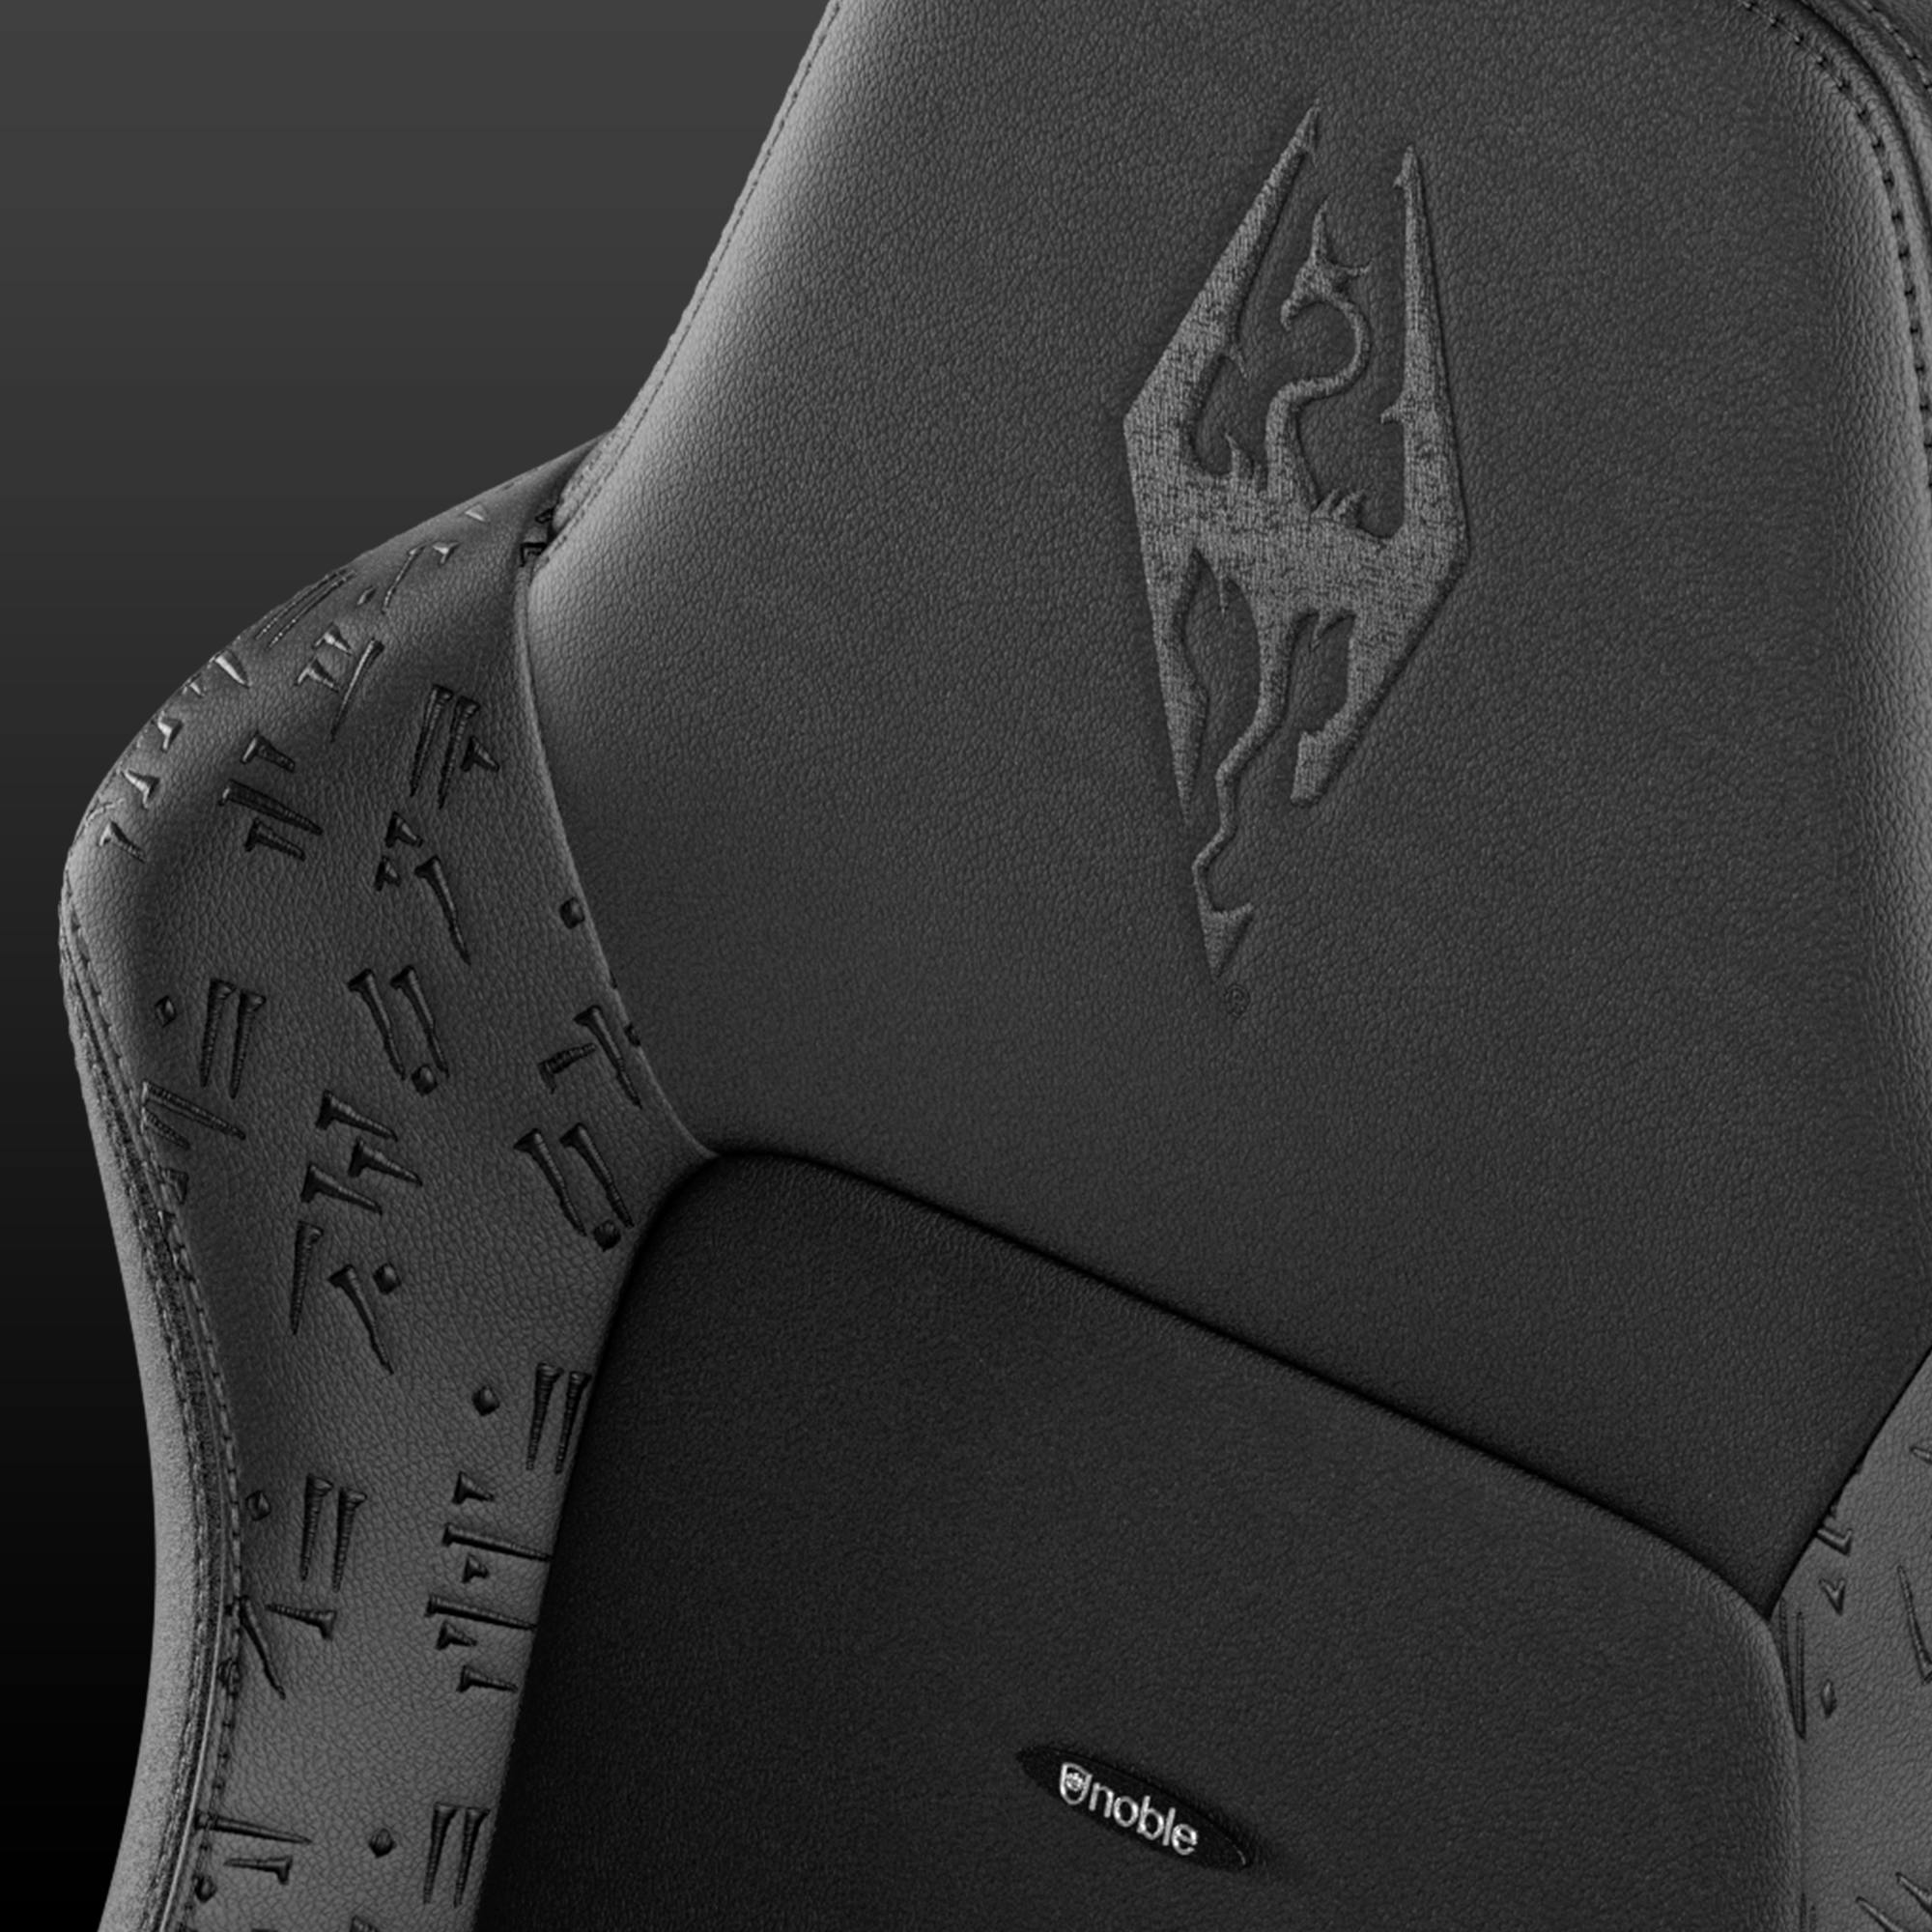 Gaming Chair Skyrim 10th Anniversary Vegan PU Leather Highlighted Details View